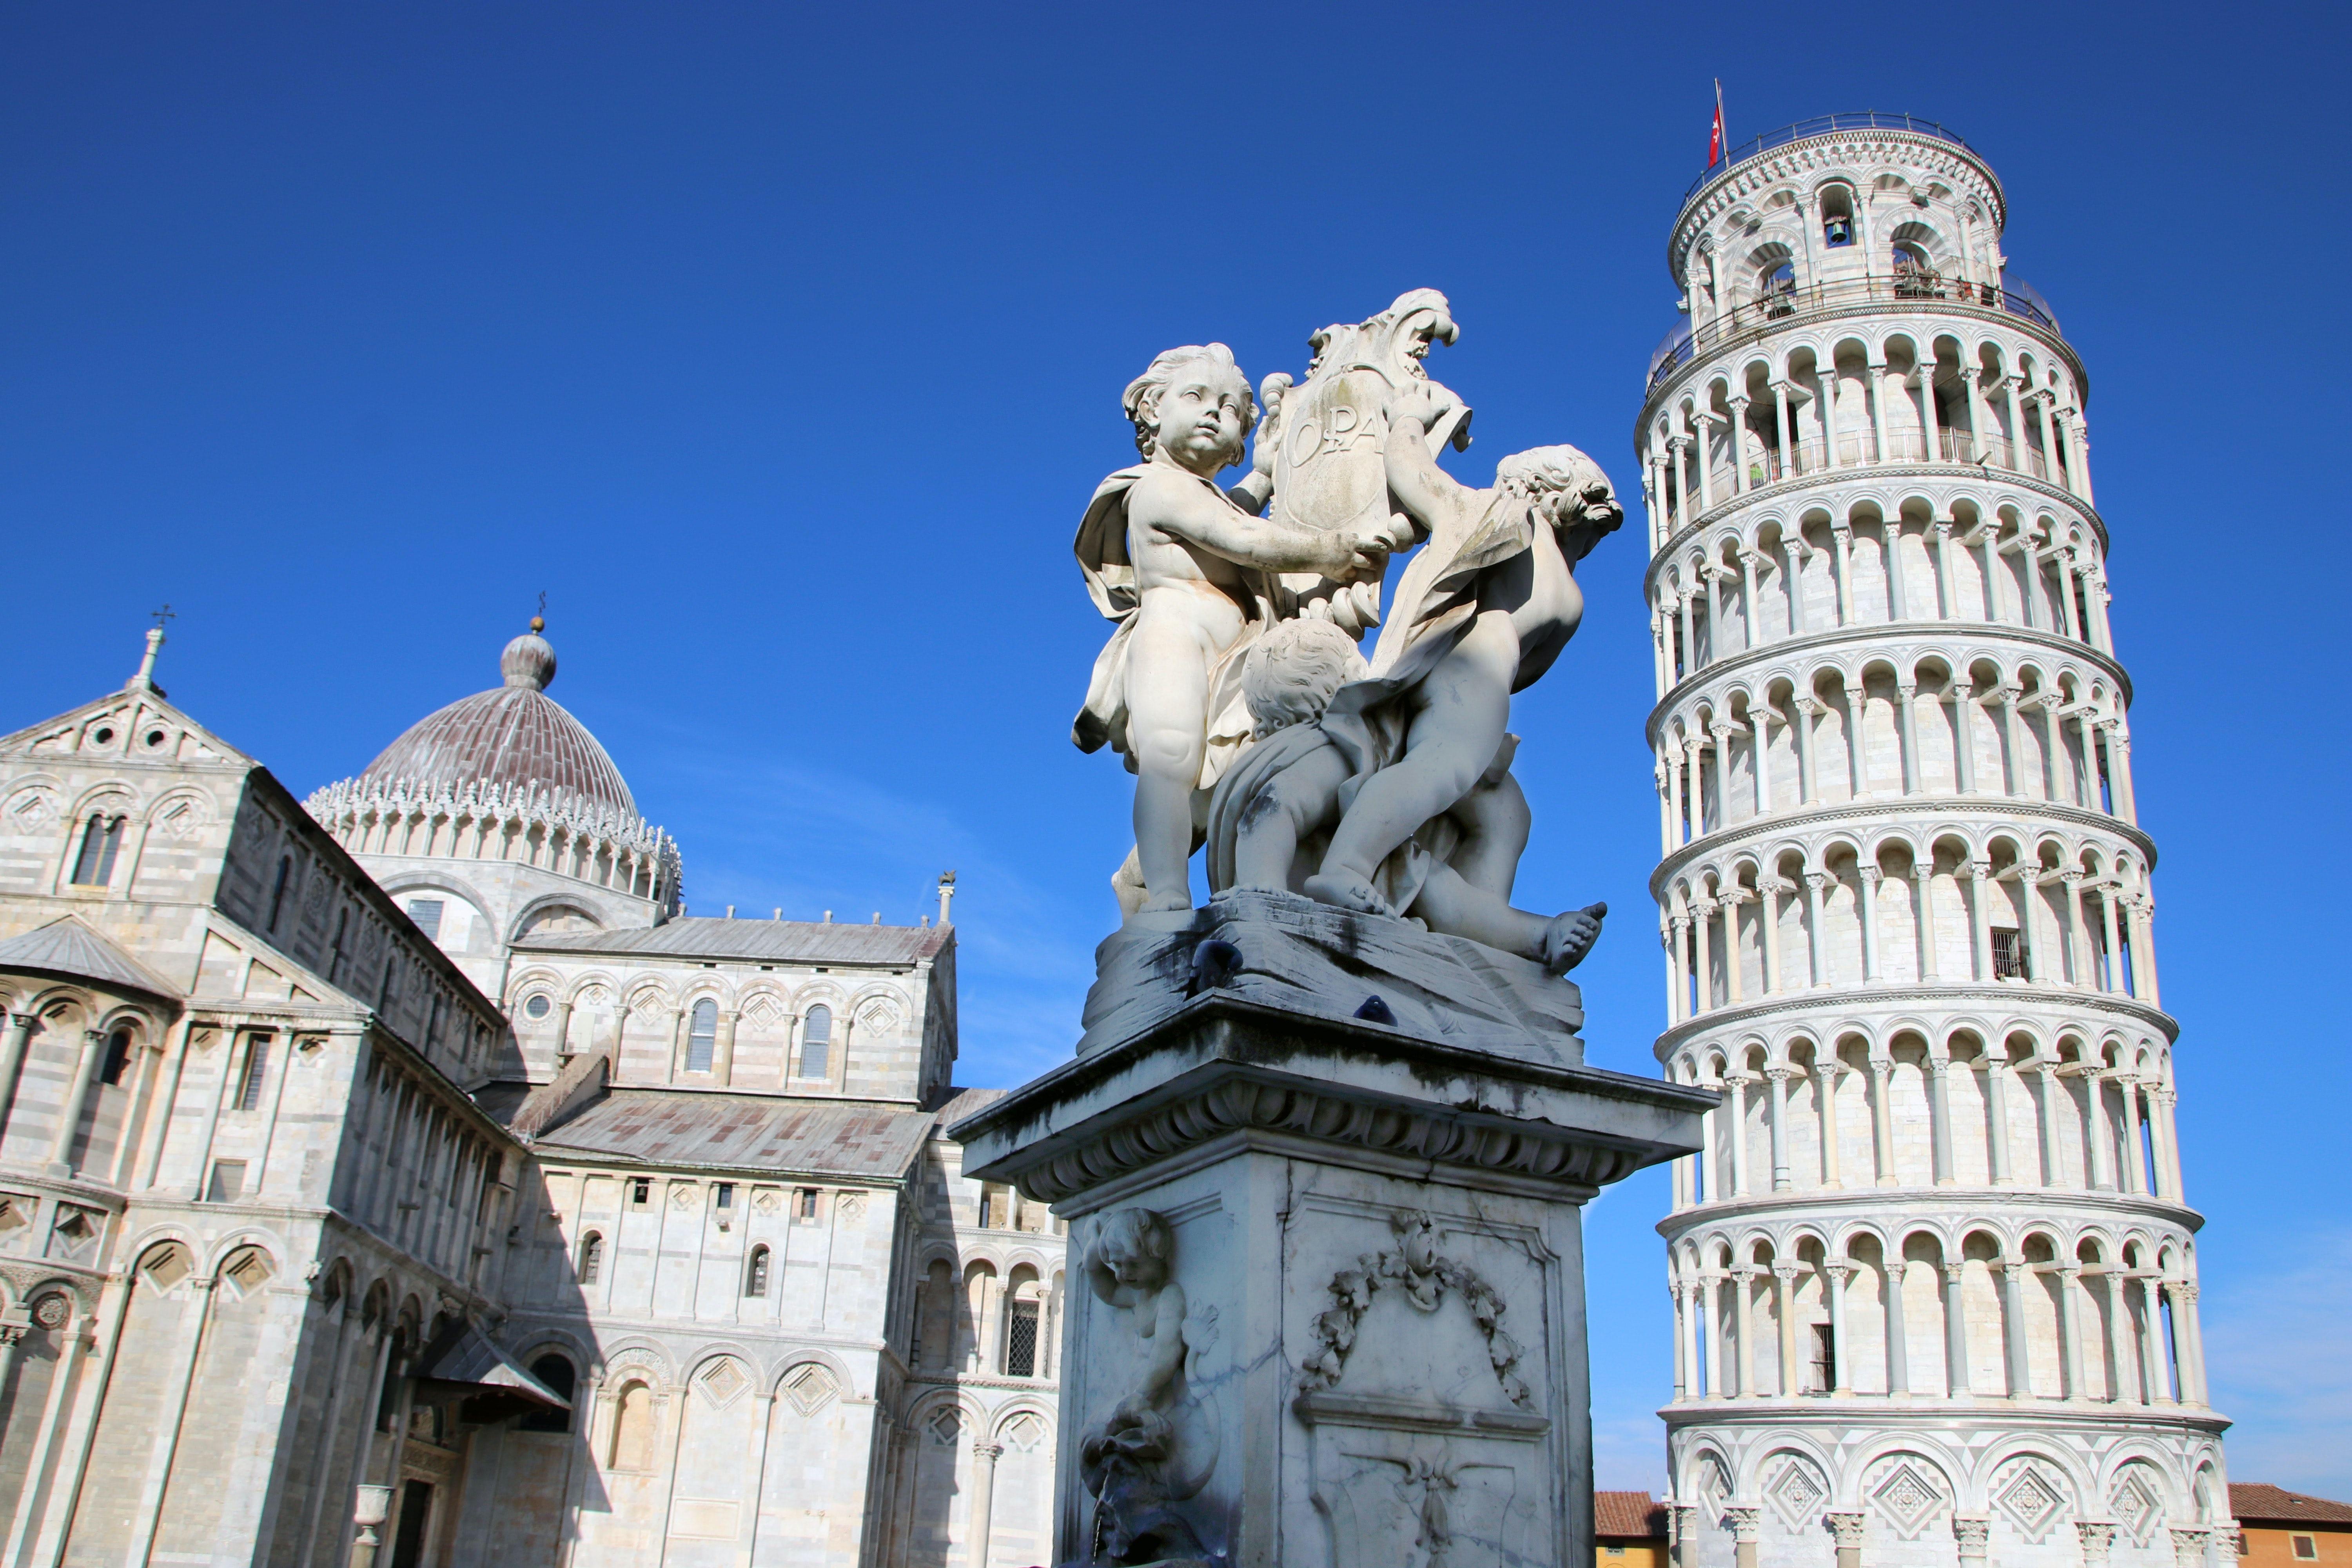 Leaning Tower of Pisa statue